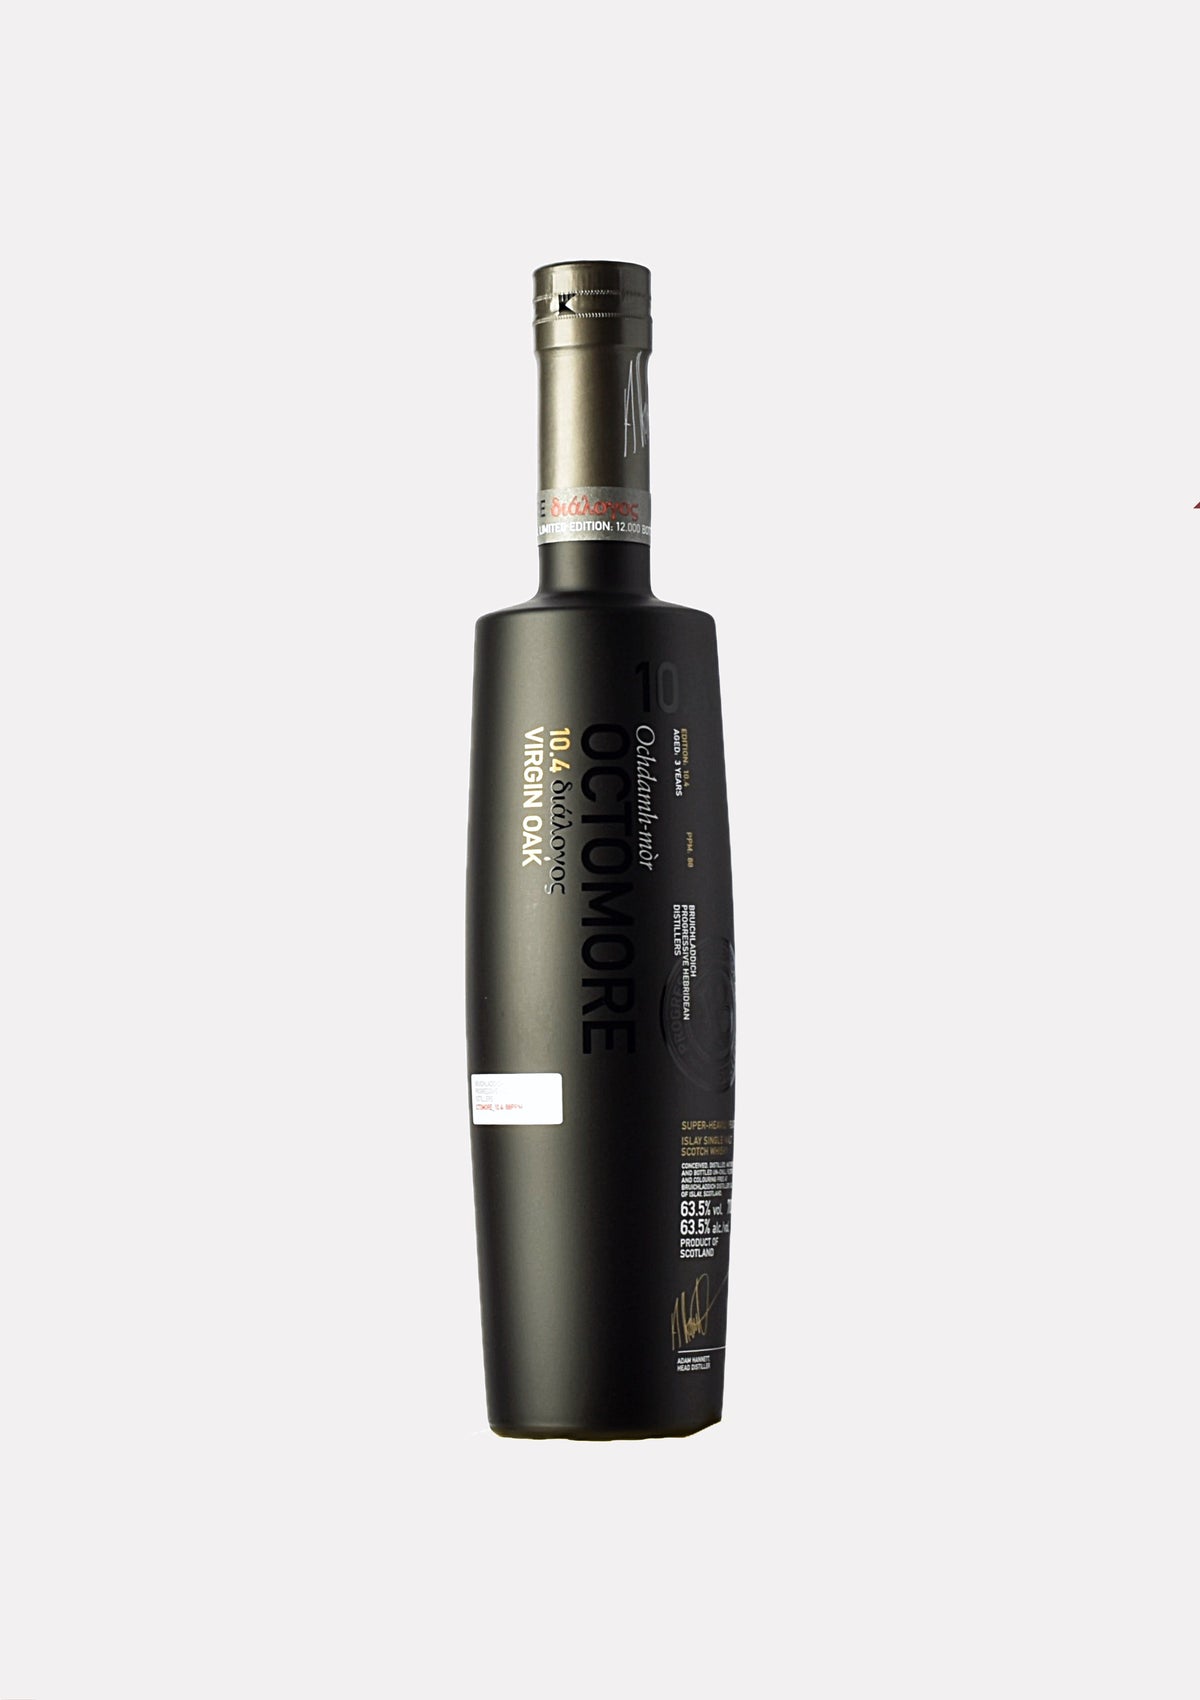 Octomore 2016- 2019 3 Jahre 10.4 88 ppm